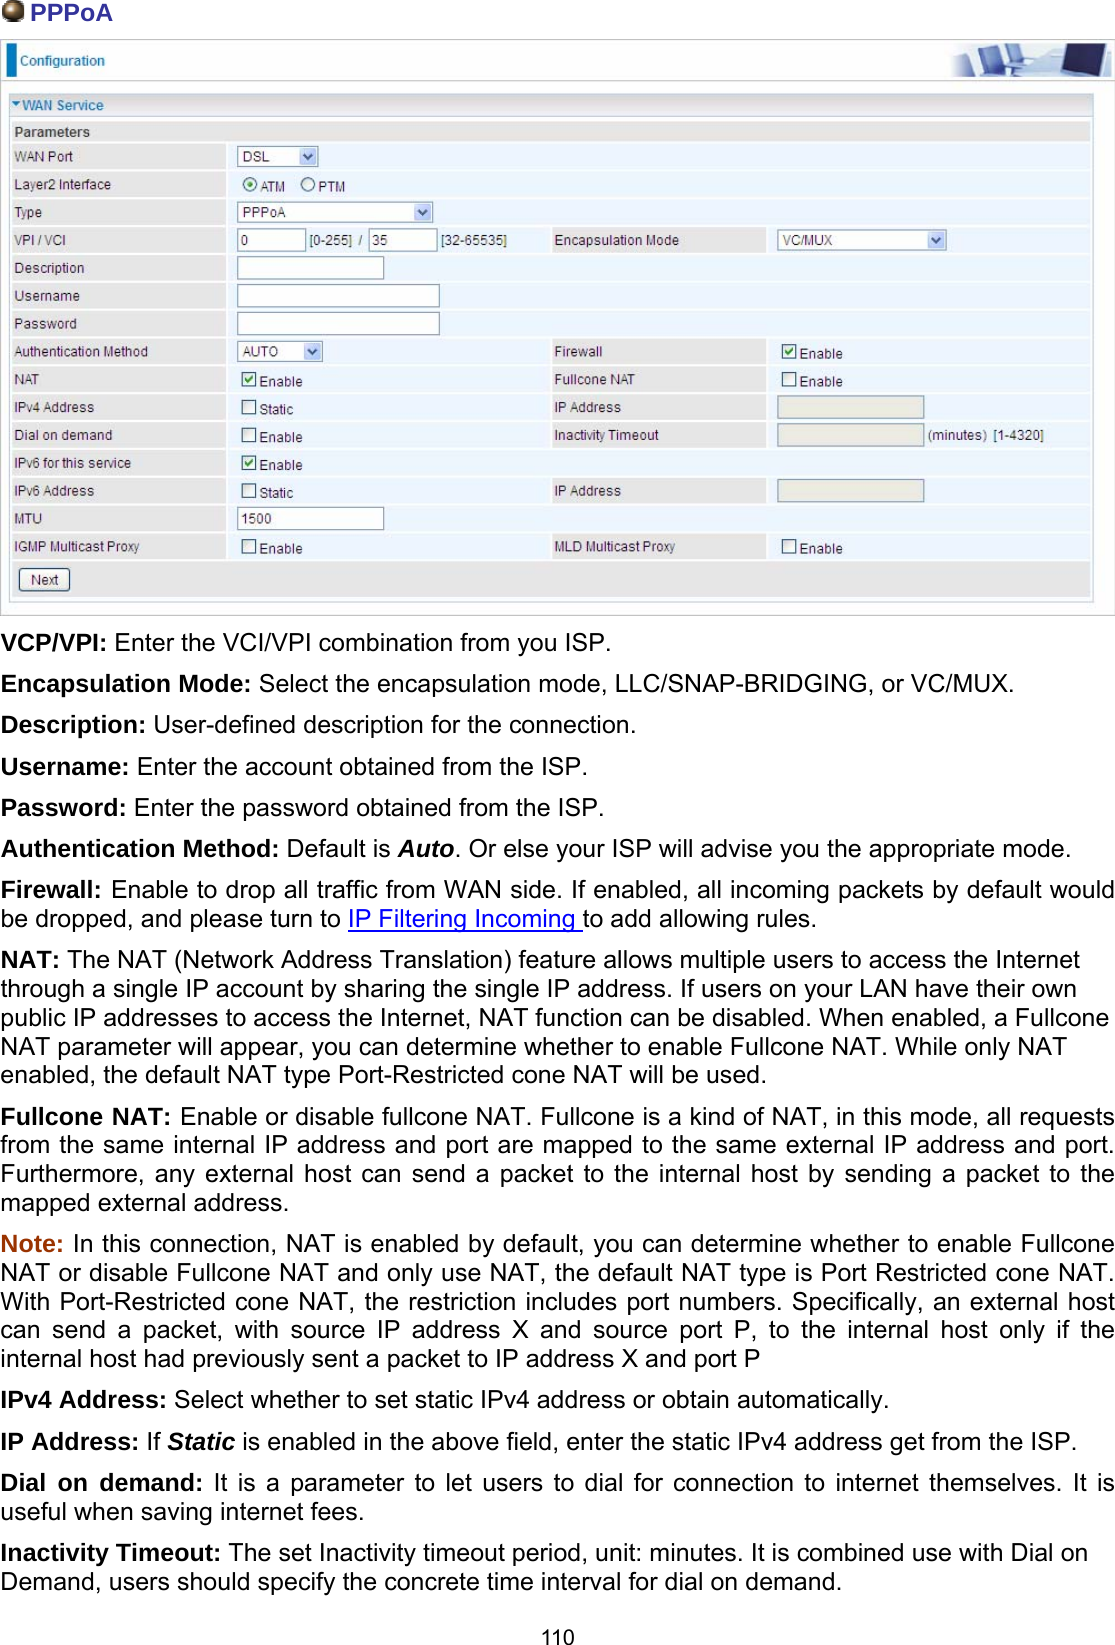  110  PPPoA  VCP/VPI: Enter the VCI/VPI combination from you ISP.  Encapsulation Mode: Select the encapsulation mode, LLC/SNAP-BRIDGING, or VC/MUX. Description: User-defined description for the connection. Username: Enter the account obtained from the ISP.  Password: Enter the password obtained from the ISP. Authentication Method: Default is Auto. Or else your ISP will advise you the appropriate mode. Firewall: Enable to drop all traffic from WAN side. If enabled, all incoming packets by default would be dropped, and please turn to IP Filtering Incoming to add allowing rules. NAT: The NAT (Network Address Translation) feature allows multiple users to access the Internet through a single IP account by sharing the single IP address. If users on your LAN have their own public IP addresses to access the Internet, NAT function can be disabled. When enabled, a Fullcone NAT parameter will appear, you can determine whether to enable Fullcone NAT. While only NAT enabled, the default NAT type Port-Restricted cone NAT will be used. Fullcone NAT: Enable or disable fullcone NAT. Fullcone is a kind of NAT, in this mode, all requests from the same internal IP address and port are mapped to the same external IP address and port. Furthermore, any external host can send a packet to the internal host by sending a packet to the mapped external address. Note: In this connection, NAT is enabled by default, you can determine whether to enable Fullcone NAT or disable Fullcone NAT and only use NAT, the default NAT type is Port Restricted cone NAT. With Port-Restricted cone NAT, the restriction includes port numbers. Specifically, an external host can send a packet, with source IP address X and source port P, to the internal host only if the internal host had previously sent a packet to IP address X and port P IPv4 Address: Select whether to set static IPv4 address or obtain automatically. IP Address: If Static is enabled in the above field, enter the static IPv4 address get from the ISP. Dial on demand: It is a parameter to let users to dial for connection to internet themselves. It is useful when saving internet fees. Inactivity Timeout: The set Inactivity timeout period, unit: minutes. It is combined use with Dial on Demand, users should specify the concrete time interval for dial on demand. 